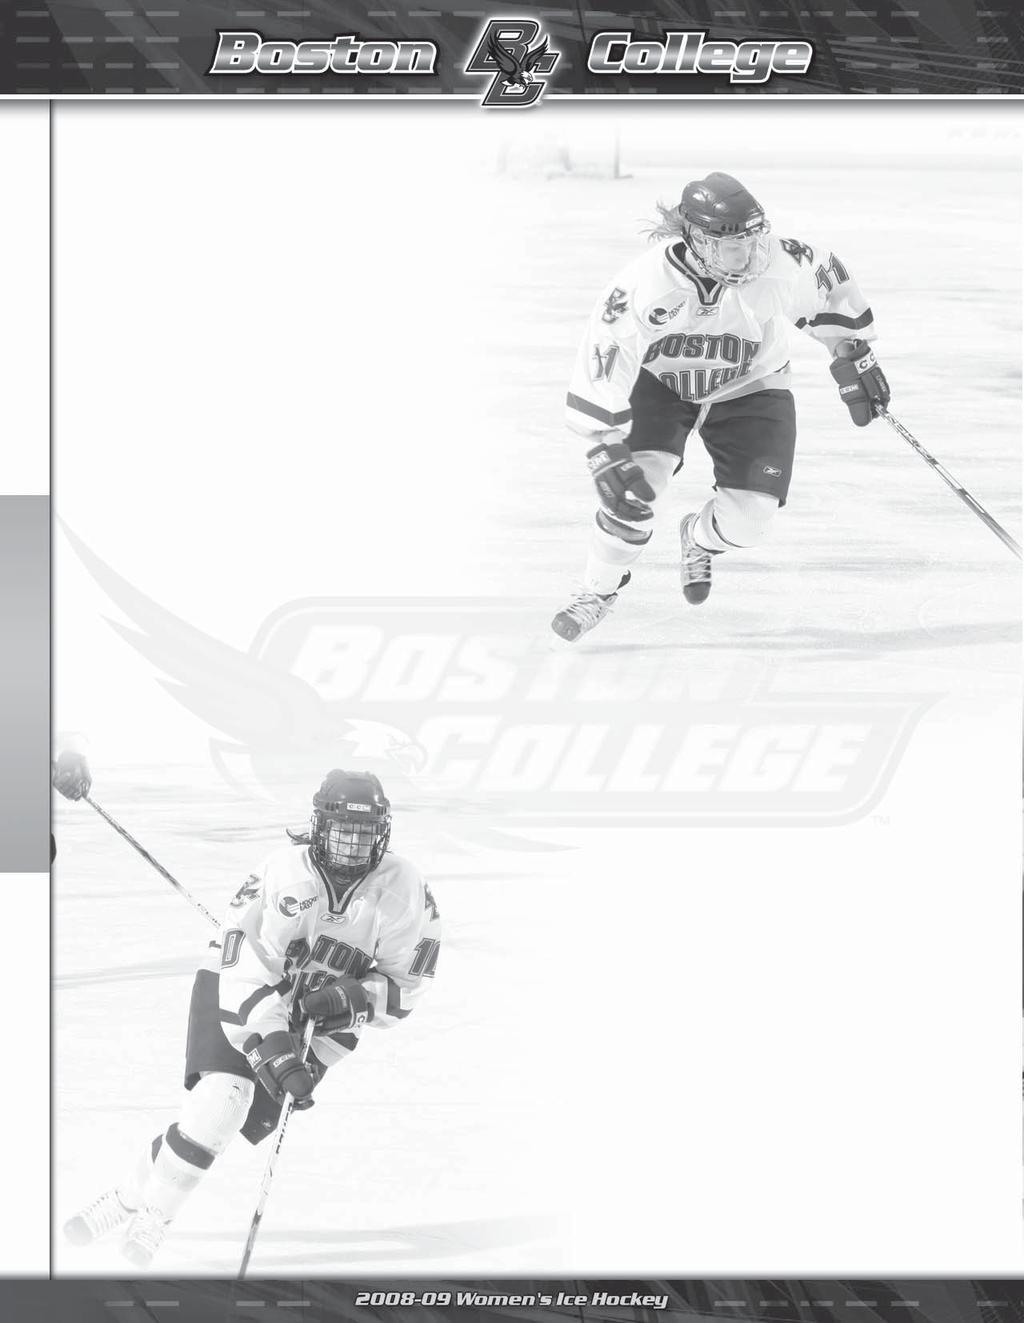 2008-09 Outlook As the Boston College women s ice hockey team takes to the ice for the 2008-2009 season it hopes to build on the experience and talent of its upperclassmen and welcome a brand new